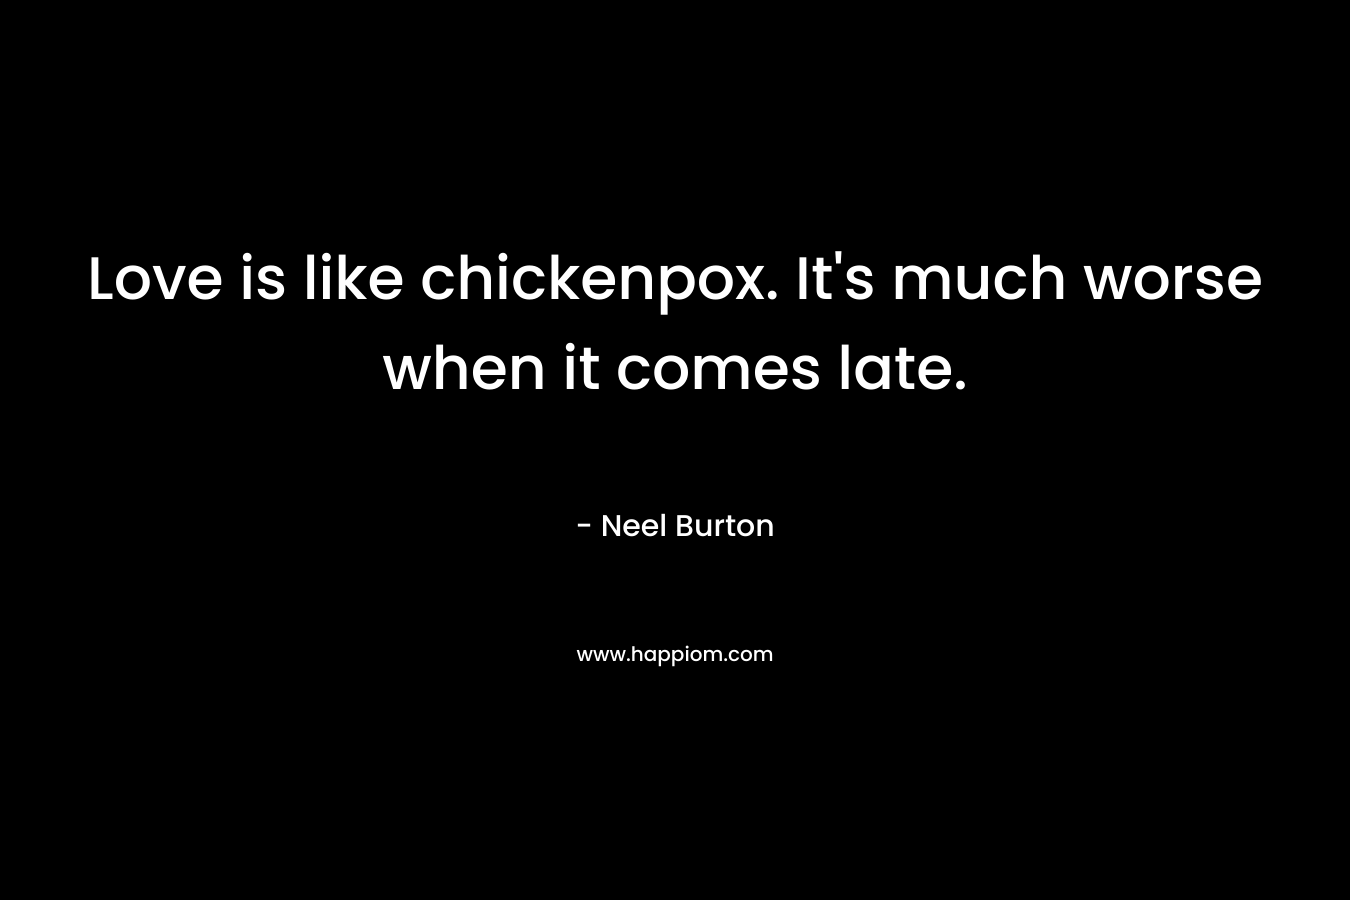 Love is like chickenpox. It's much worse when it comes late.